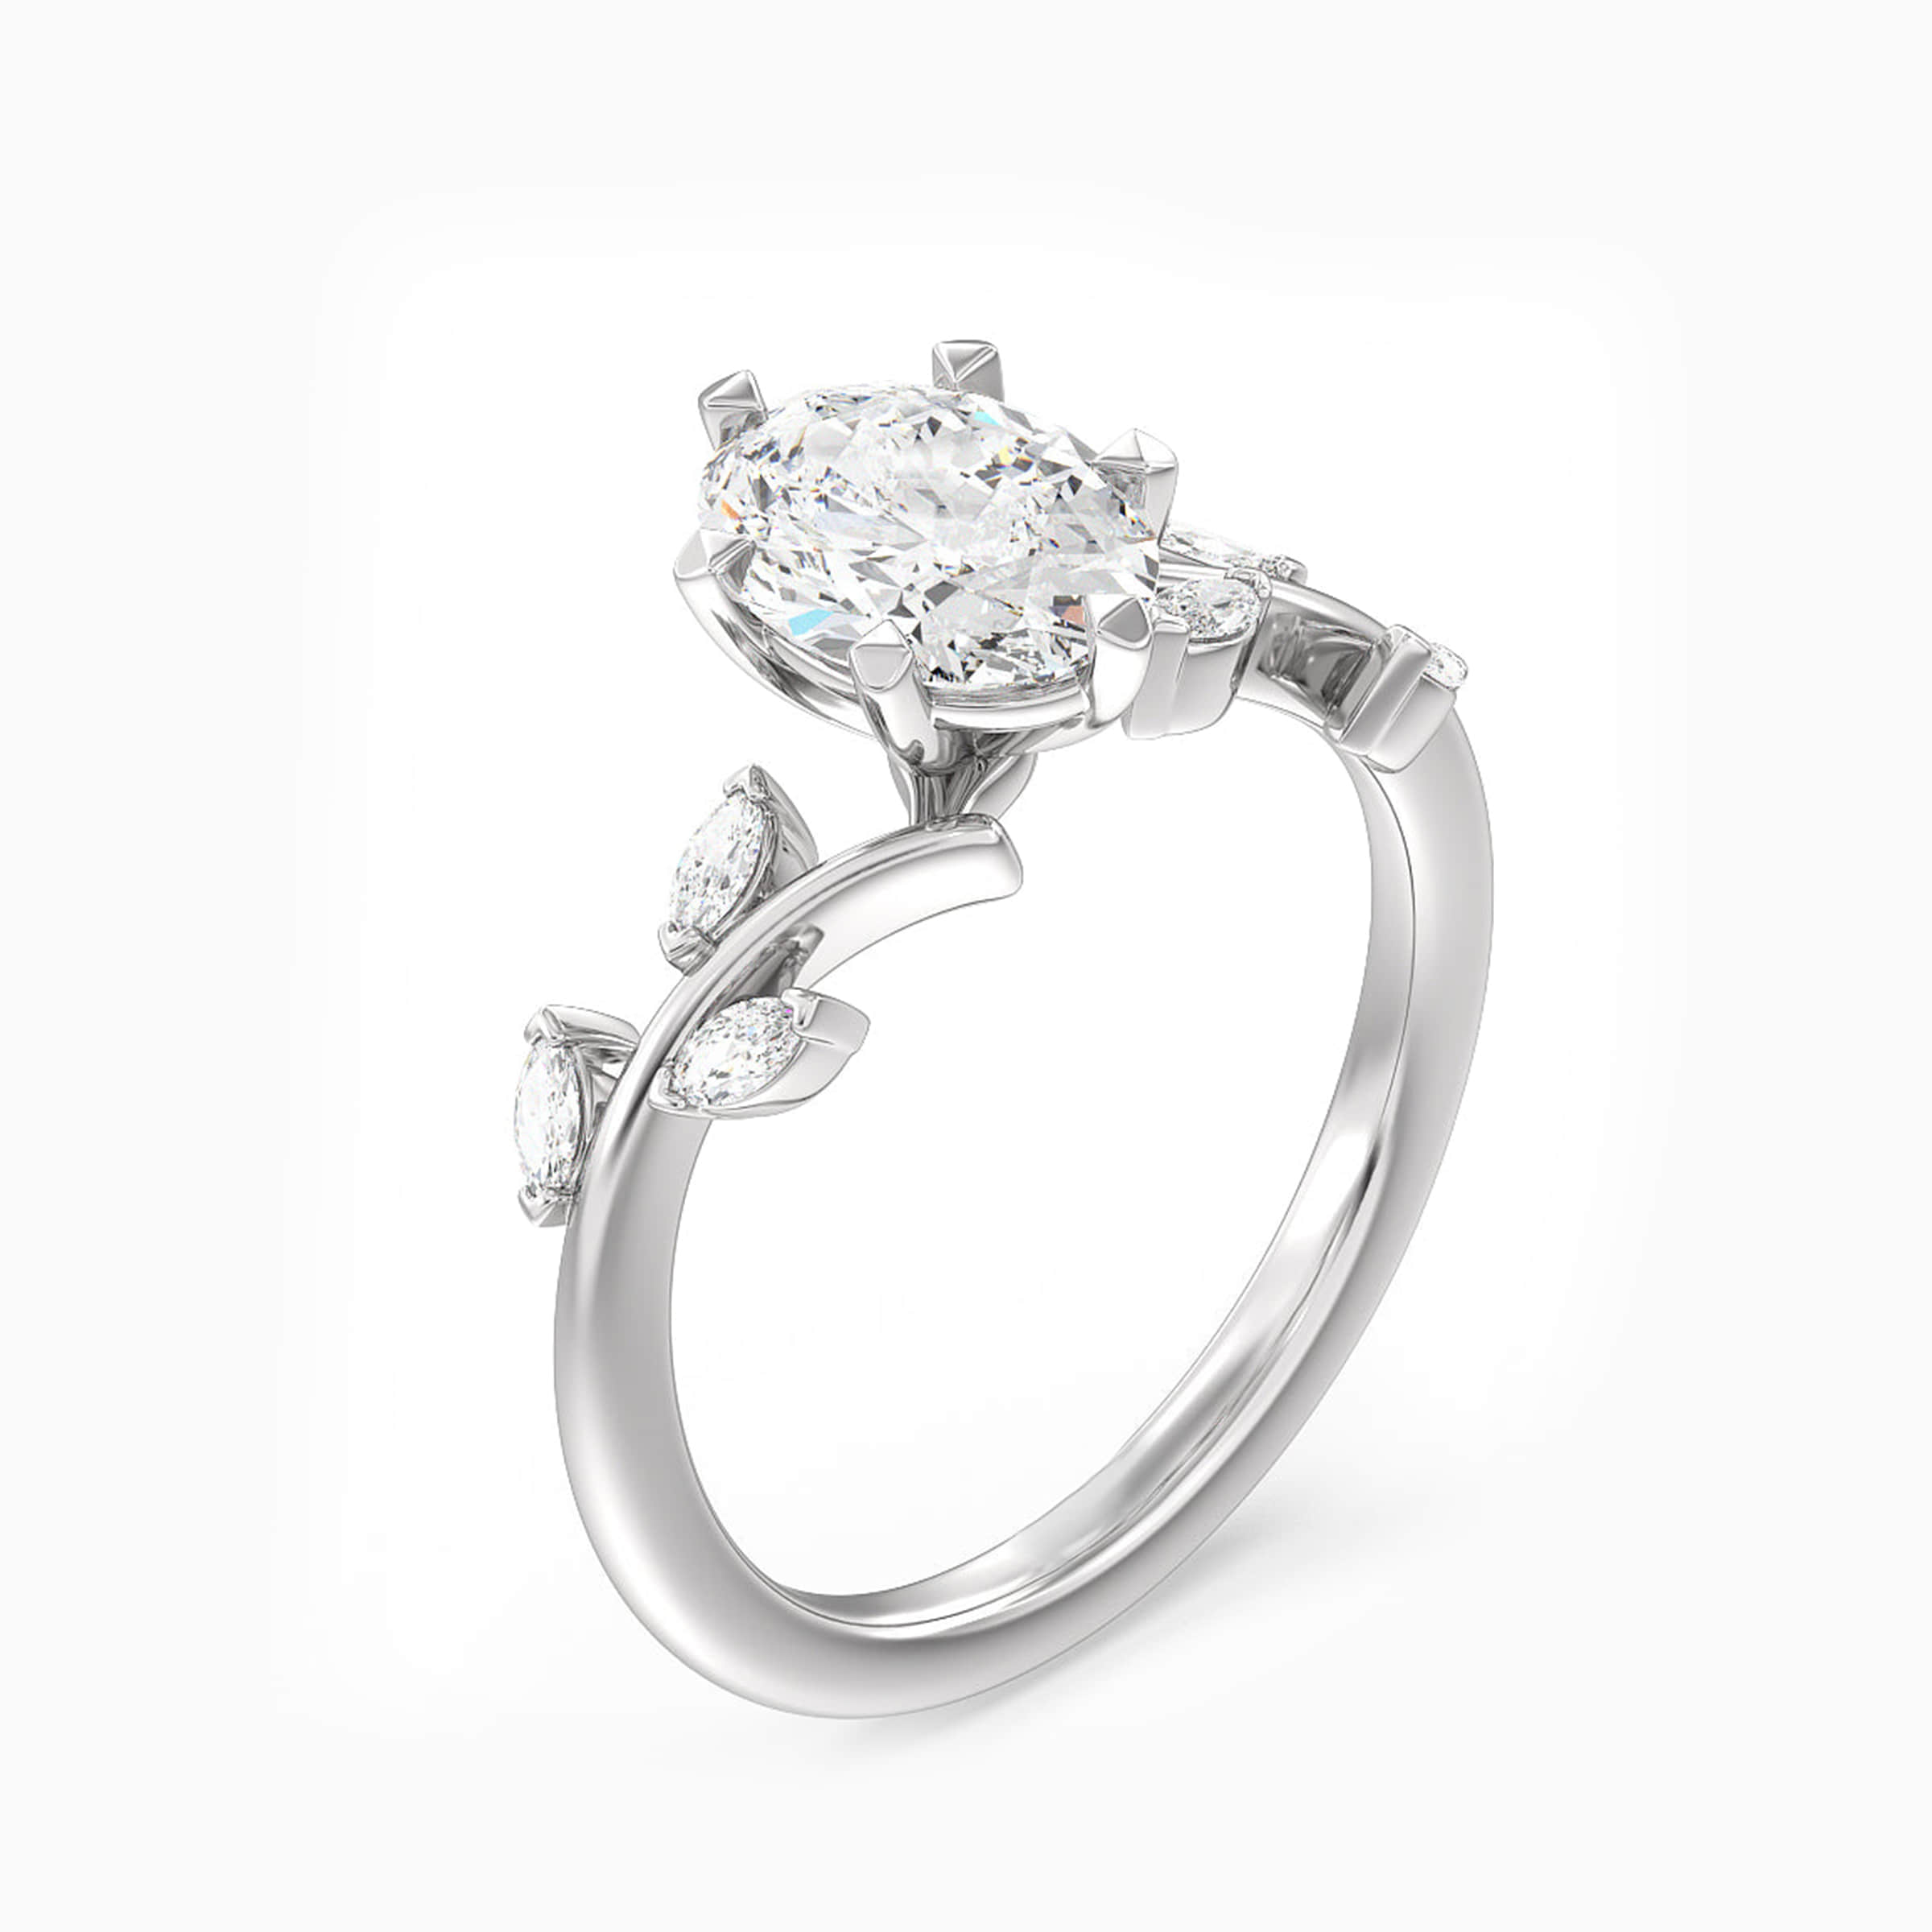 Darry Ring oval diamond bypass engagement ring in platinum